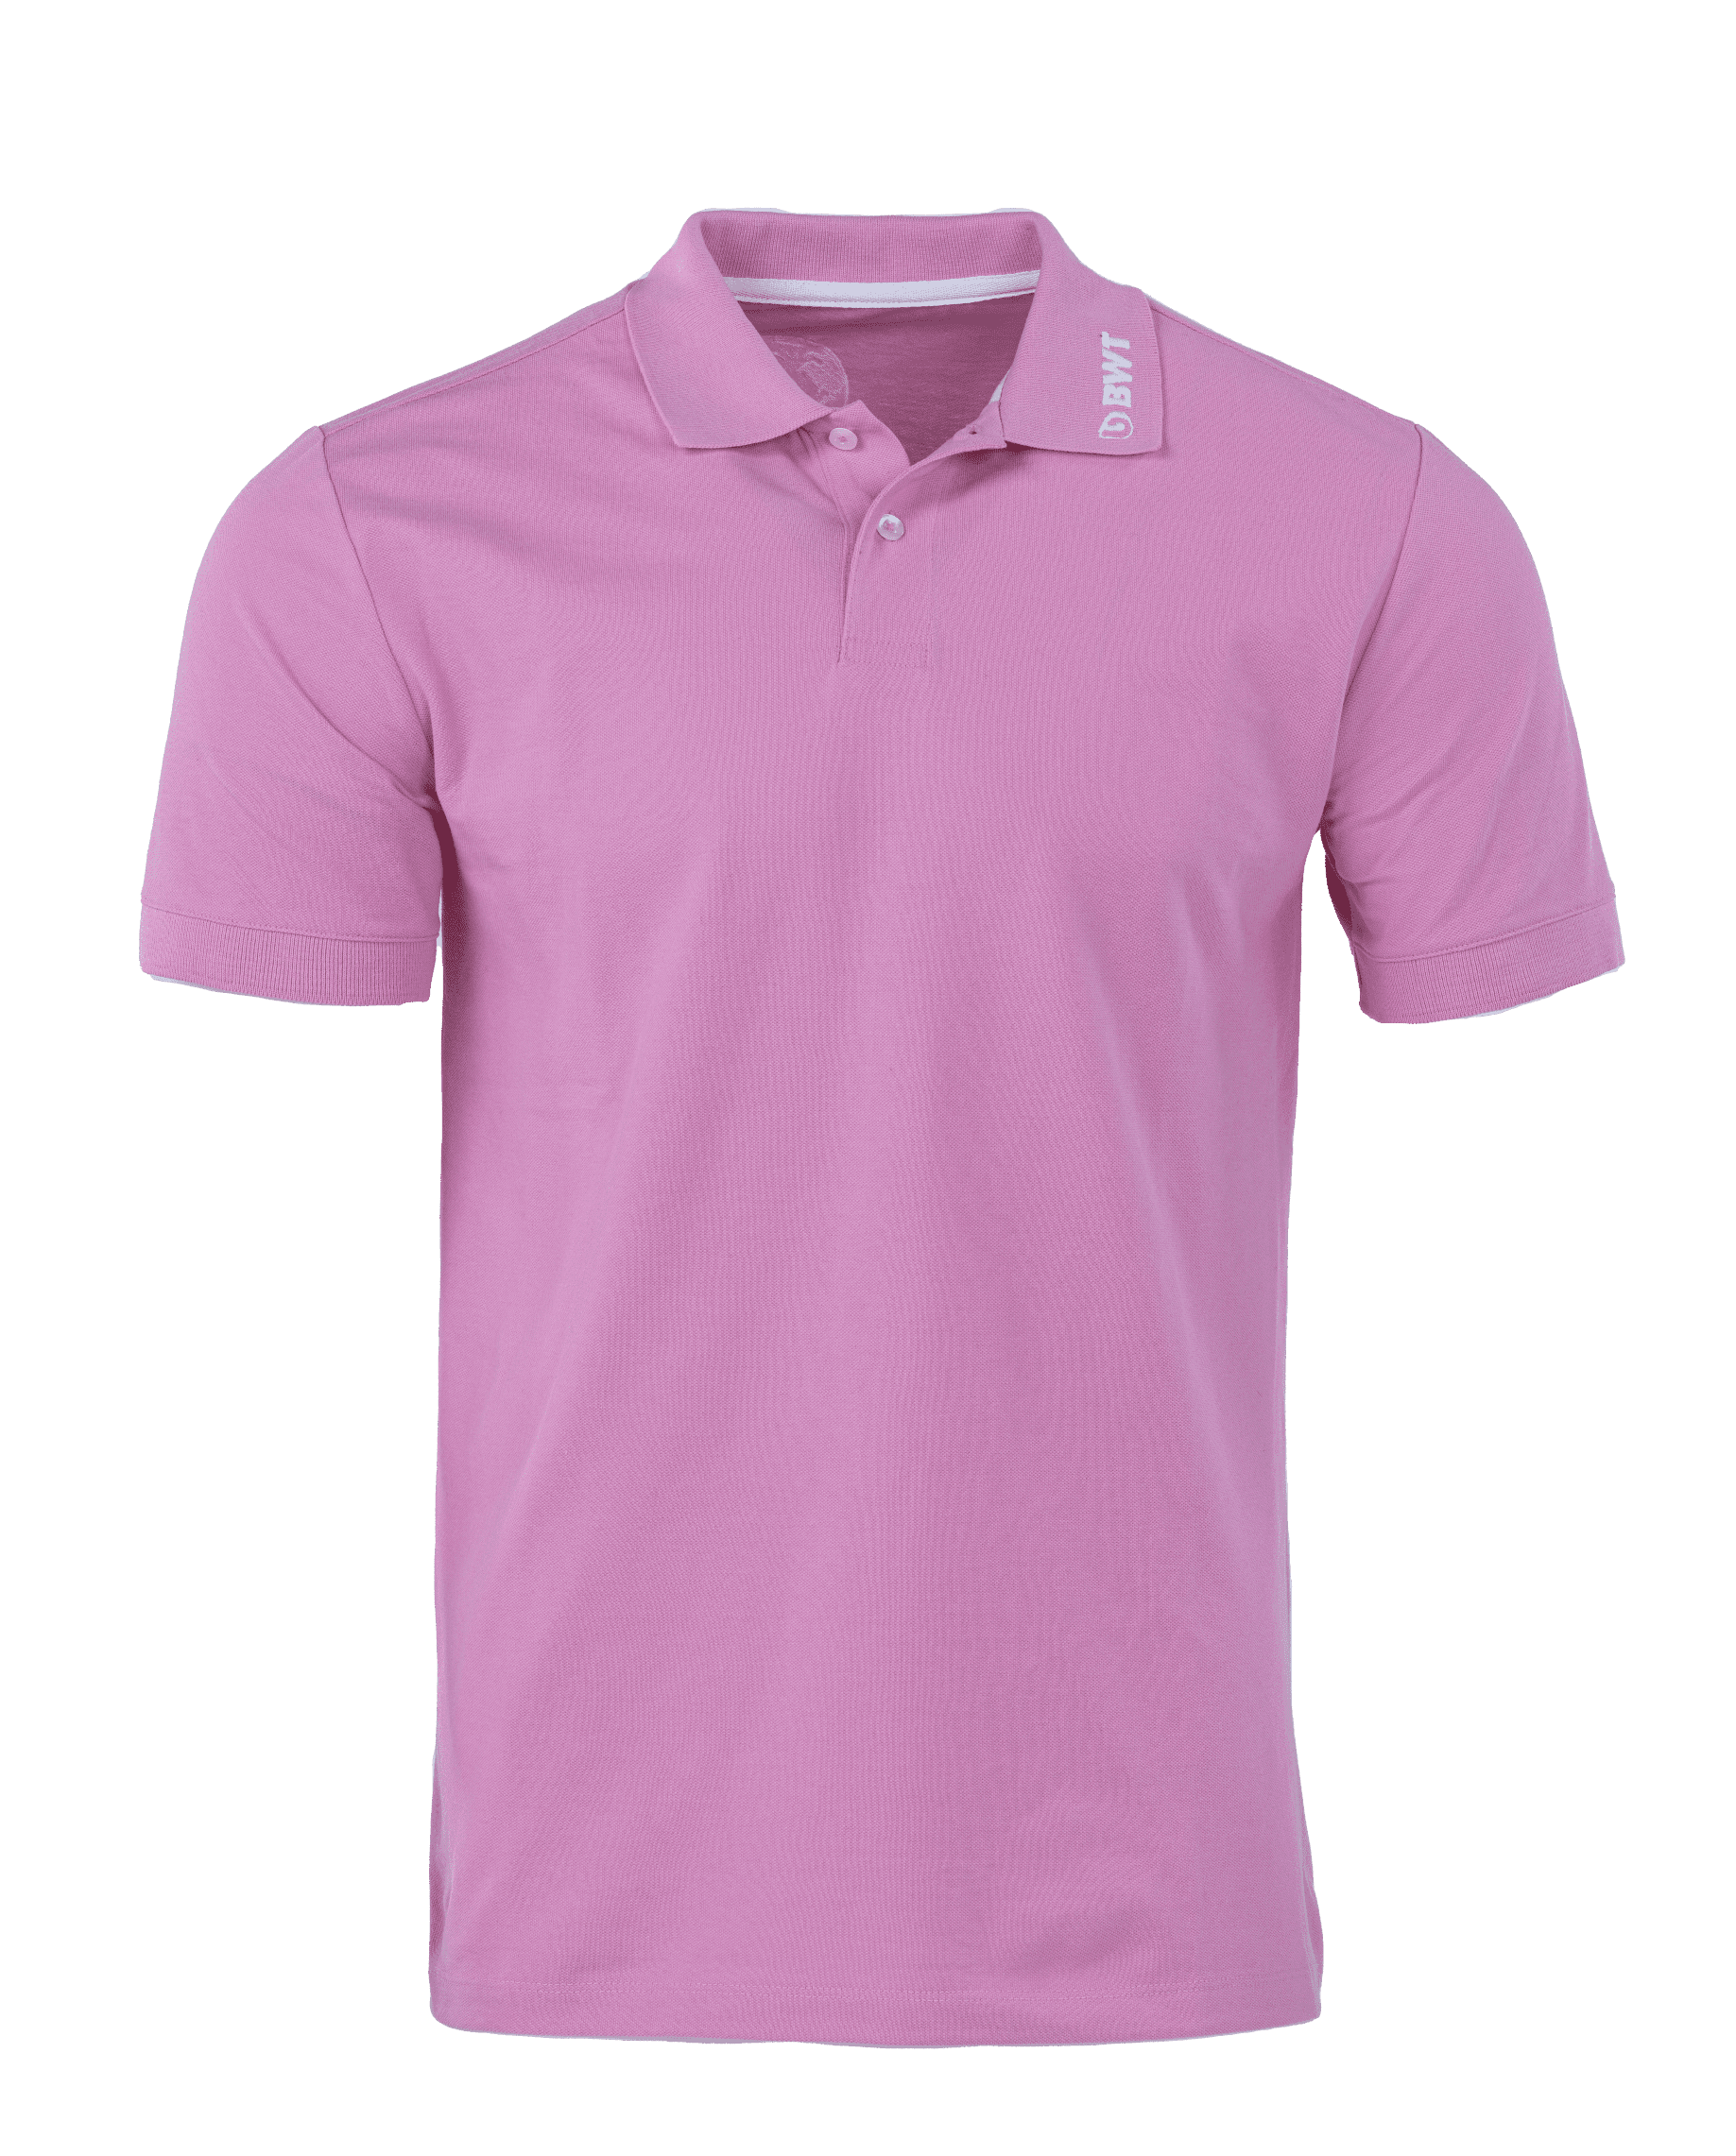 Mens polo shirt in pink from BWT